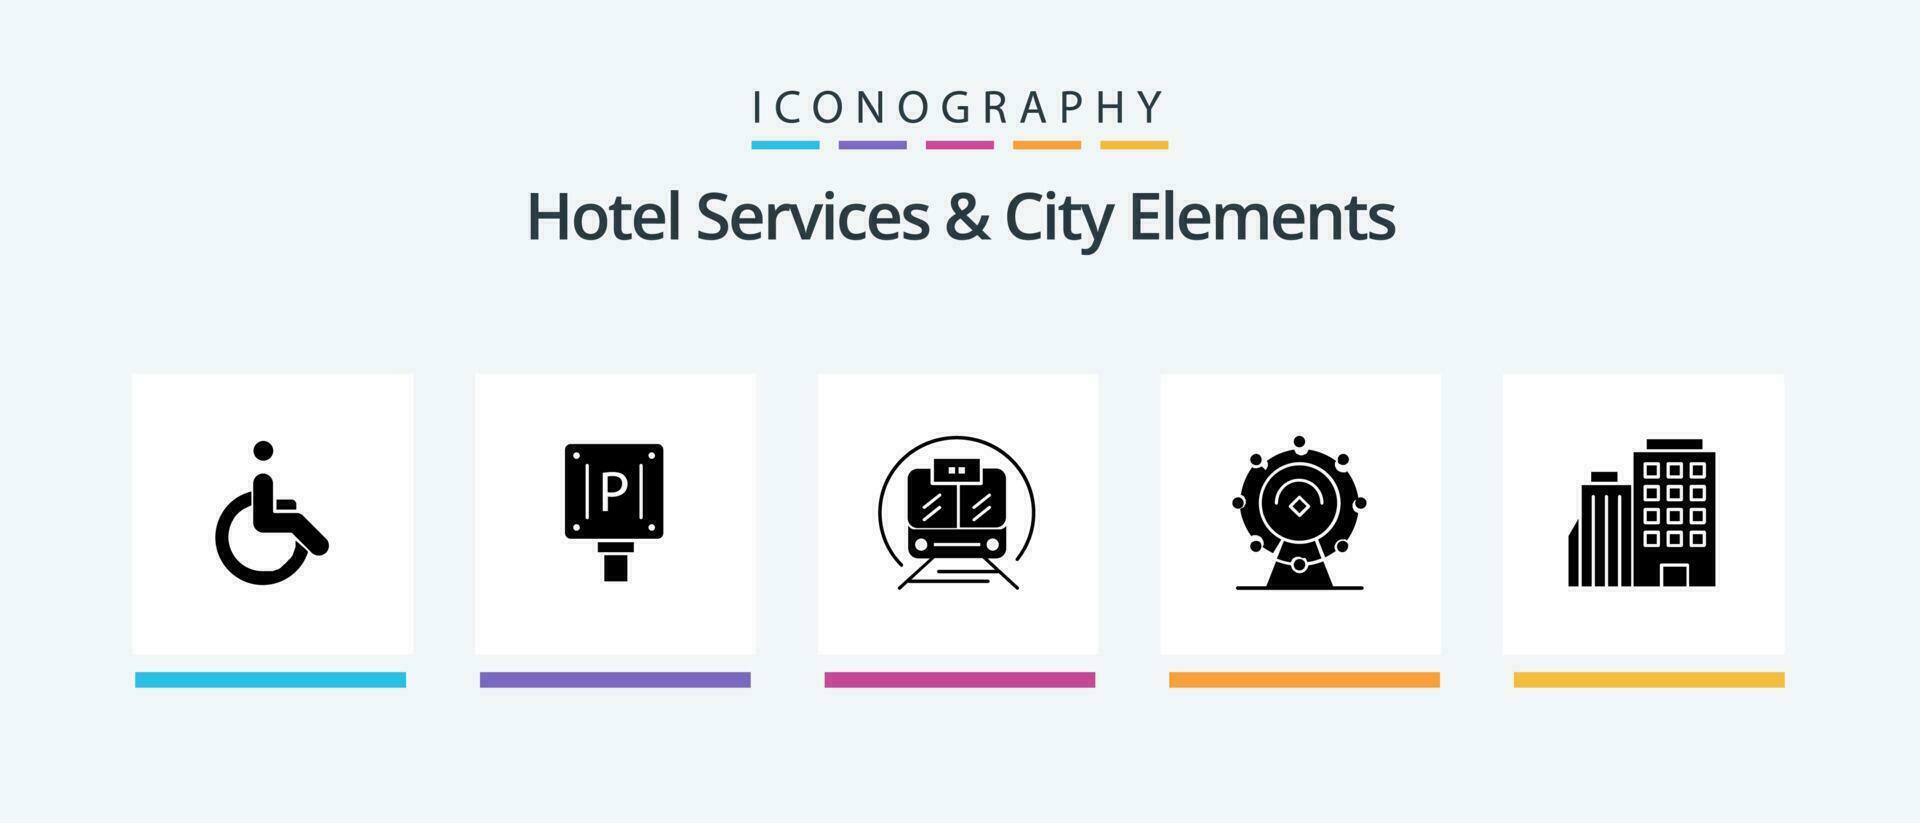 Hotel Services And City Elements Glyph 5 Icon Pack Including builing. hotel. speed train. service. browser. Creative Icons Design vector